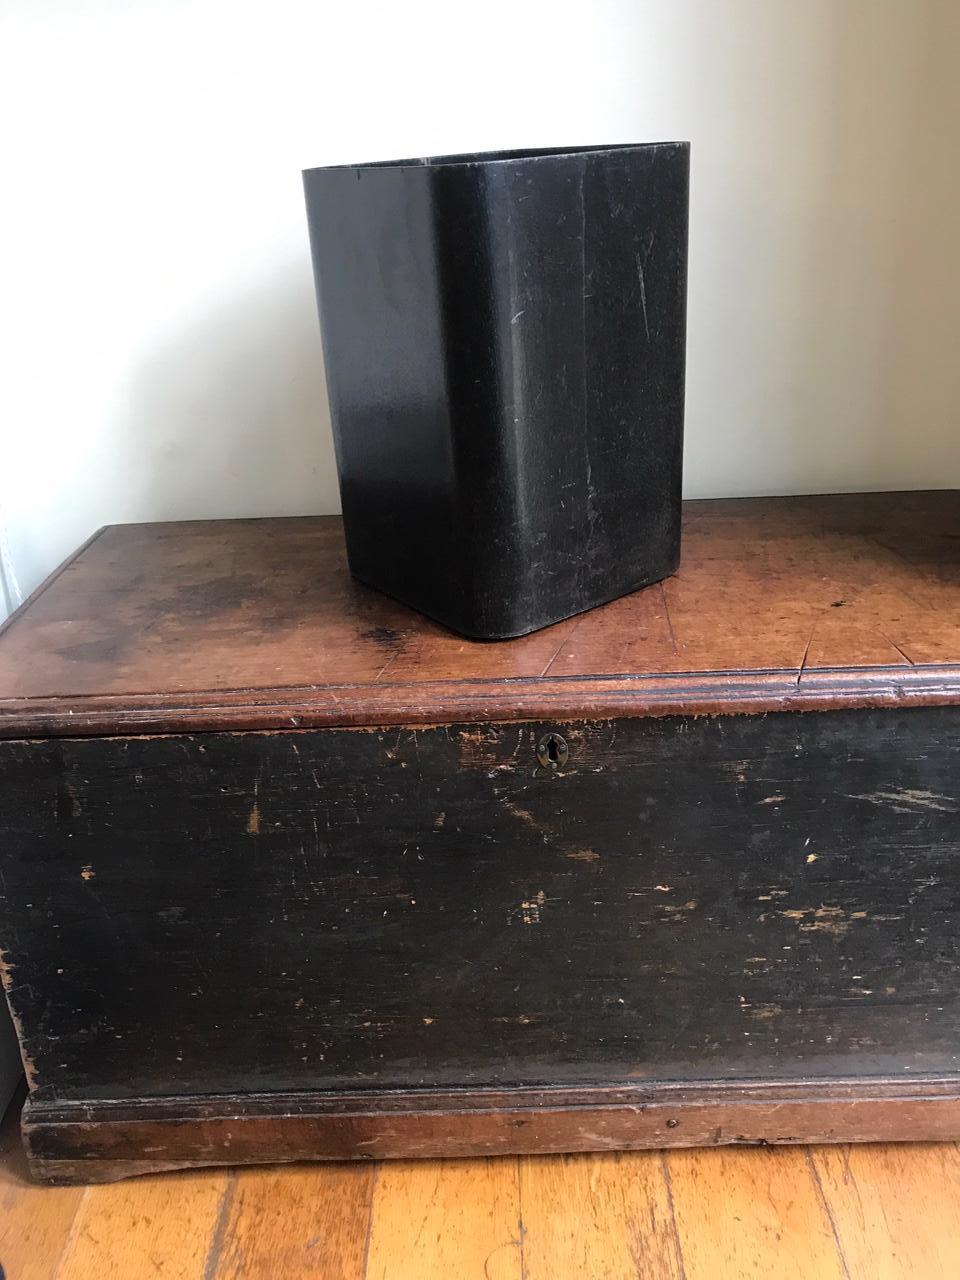 A stylish 1950s black stained plywood waste paper bin in the style of Alvar Aalto. No makers mark. Some minor chips to the veneer on the rim of the bin and some minor wear and tear. Four steel coasters to the base.